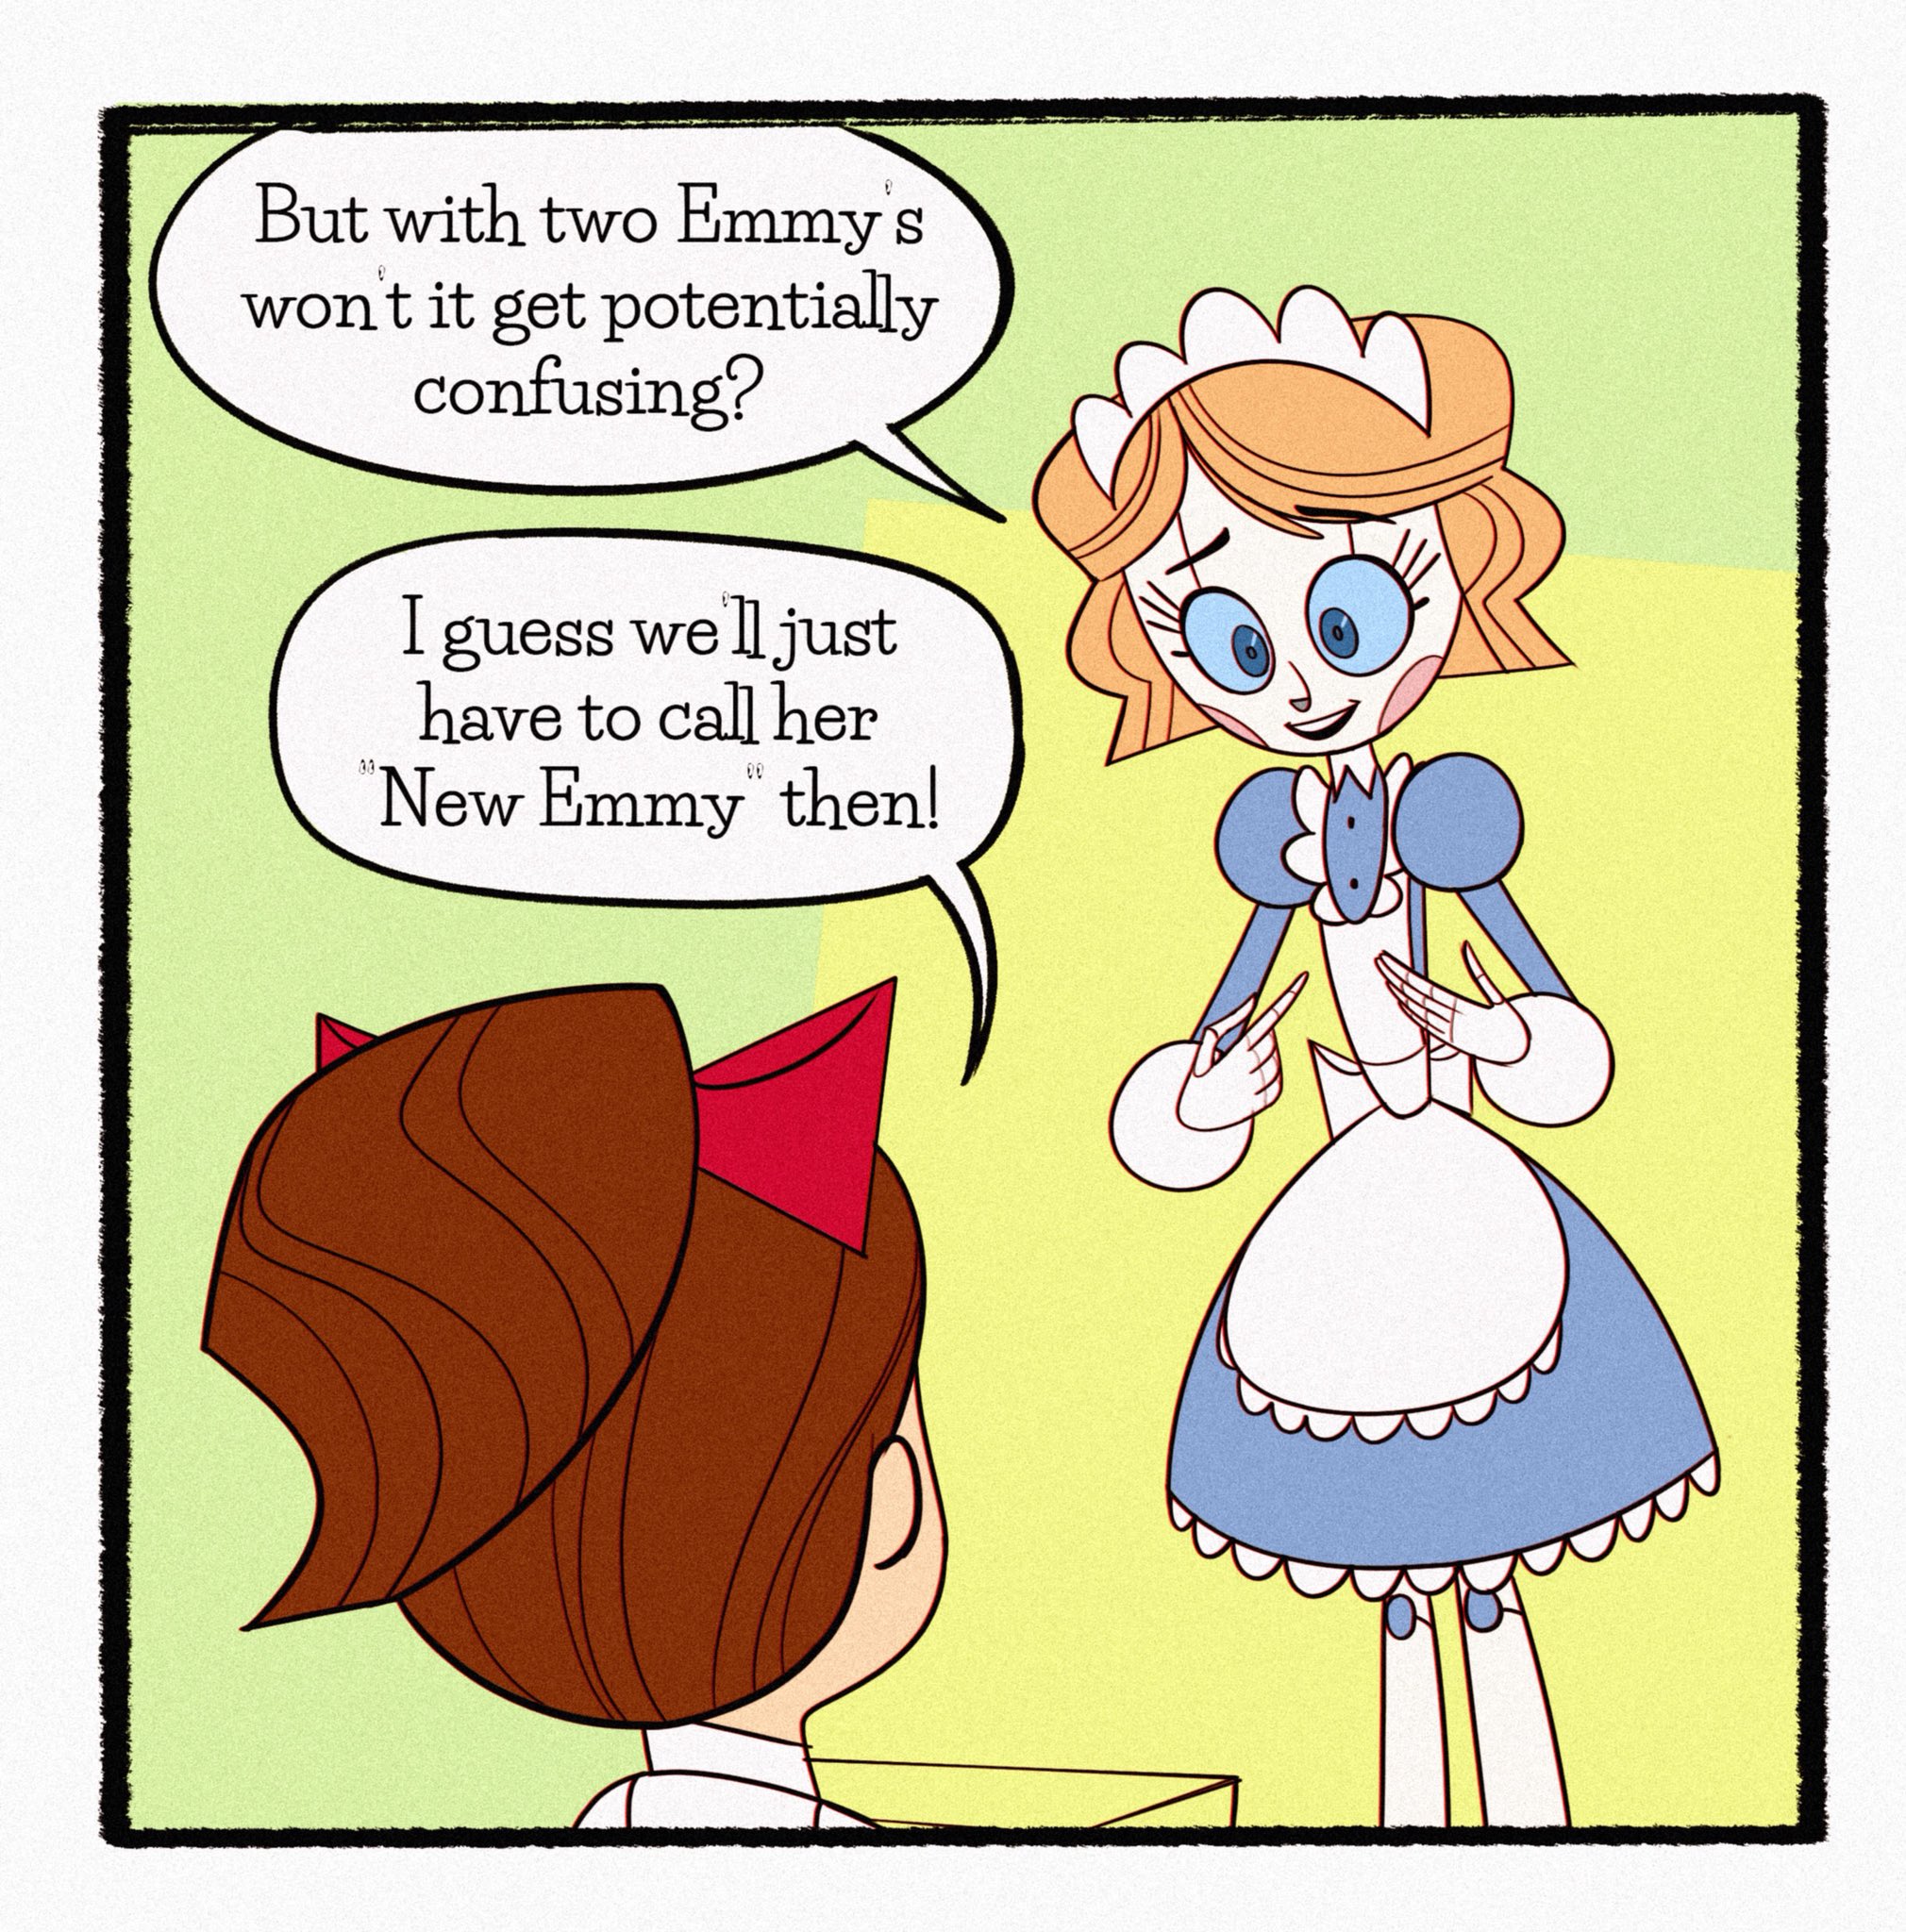 Emmy the robot maid